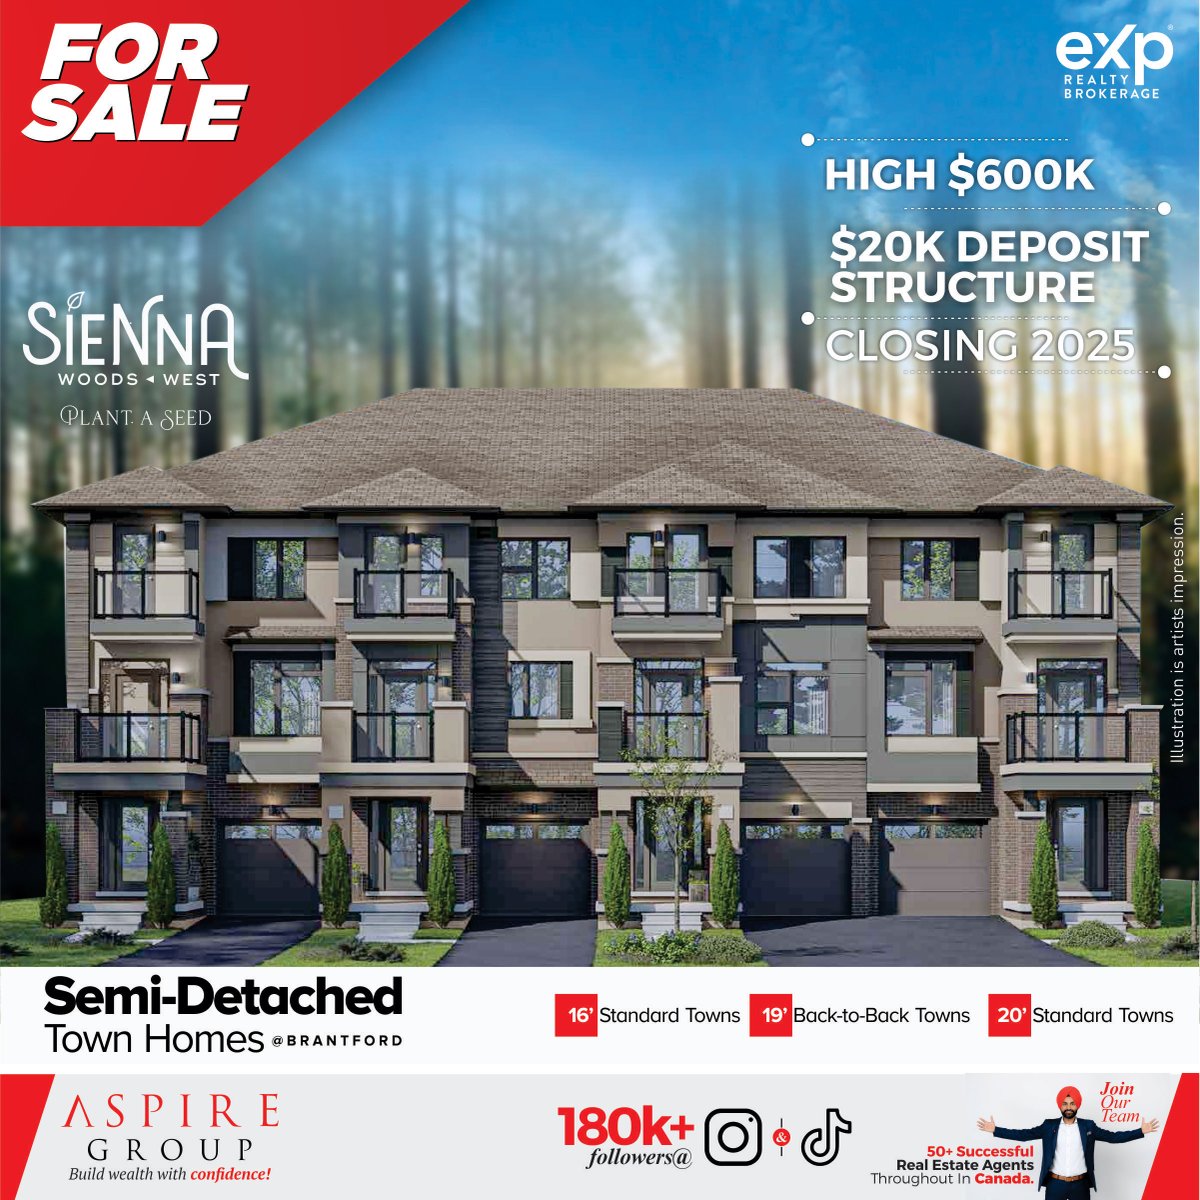 Semi-Detached Townhomes, closing 2025, $ 20K deposit structure, starting from low $600k in the heart of Brantford. 
#preconstruction #realestate #brantford #toronto #mississauga #canada  #realestate  #love #dhesirealestate #brantfordrealestate #aspiregroupexp